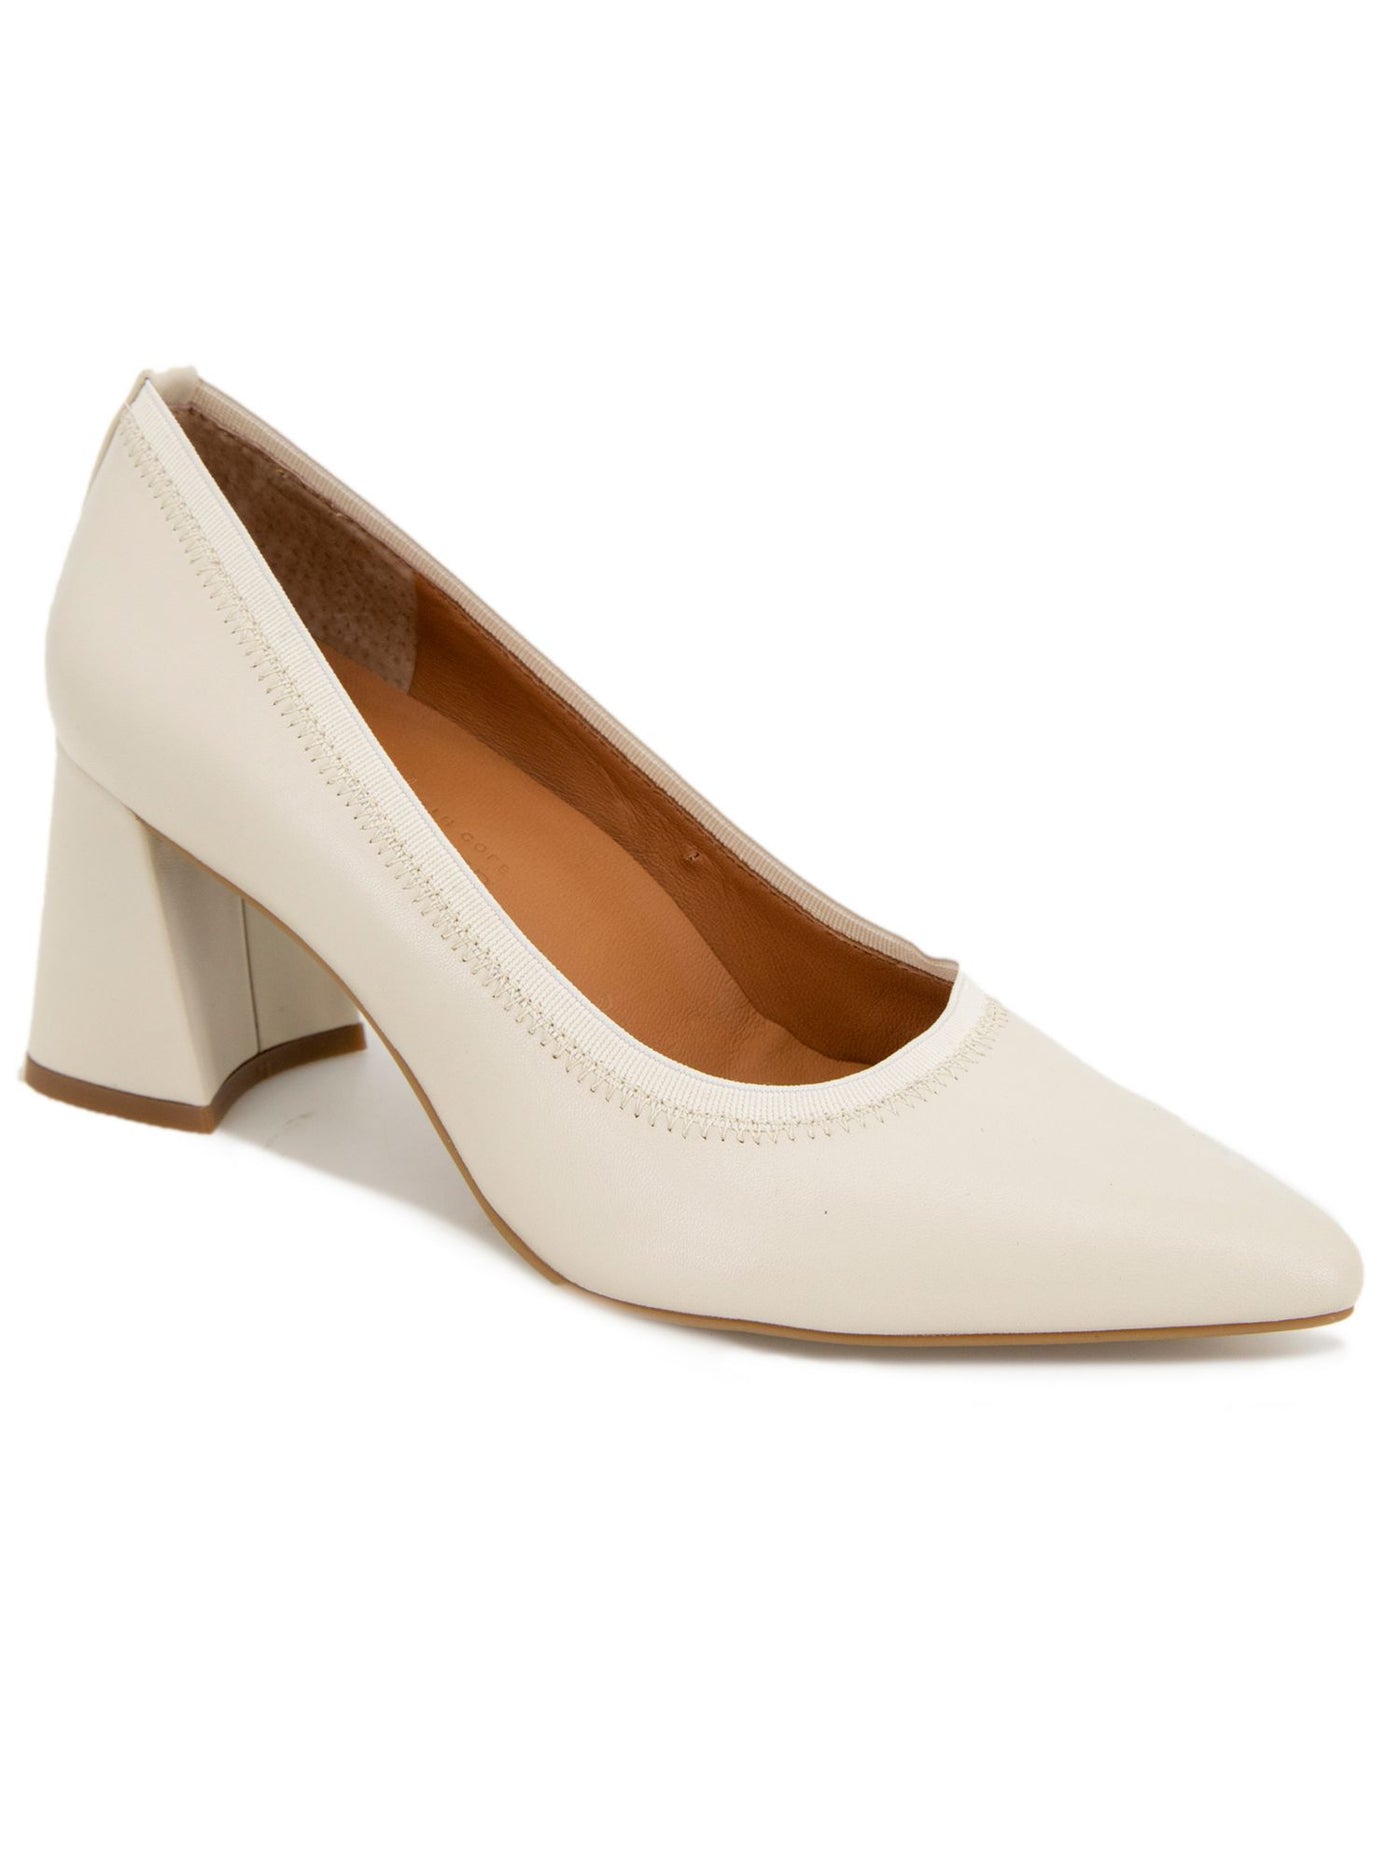 GENTLE SOULS KENNETH COLE Womens Beige Cushioned Dionne Pointed Toe Flare Slip On Leather Pumps Shoes 10 M